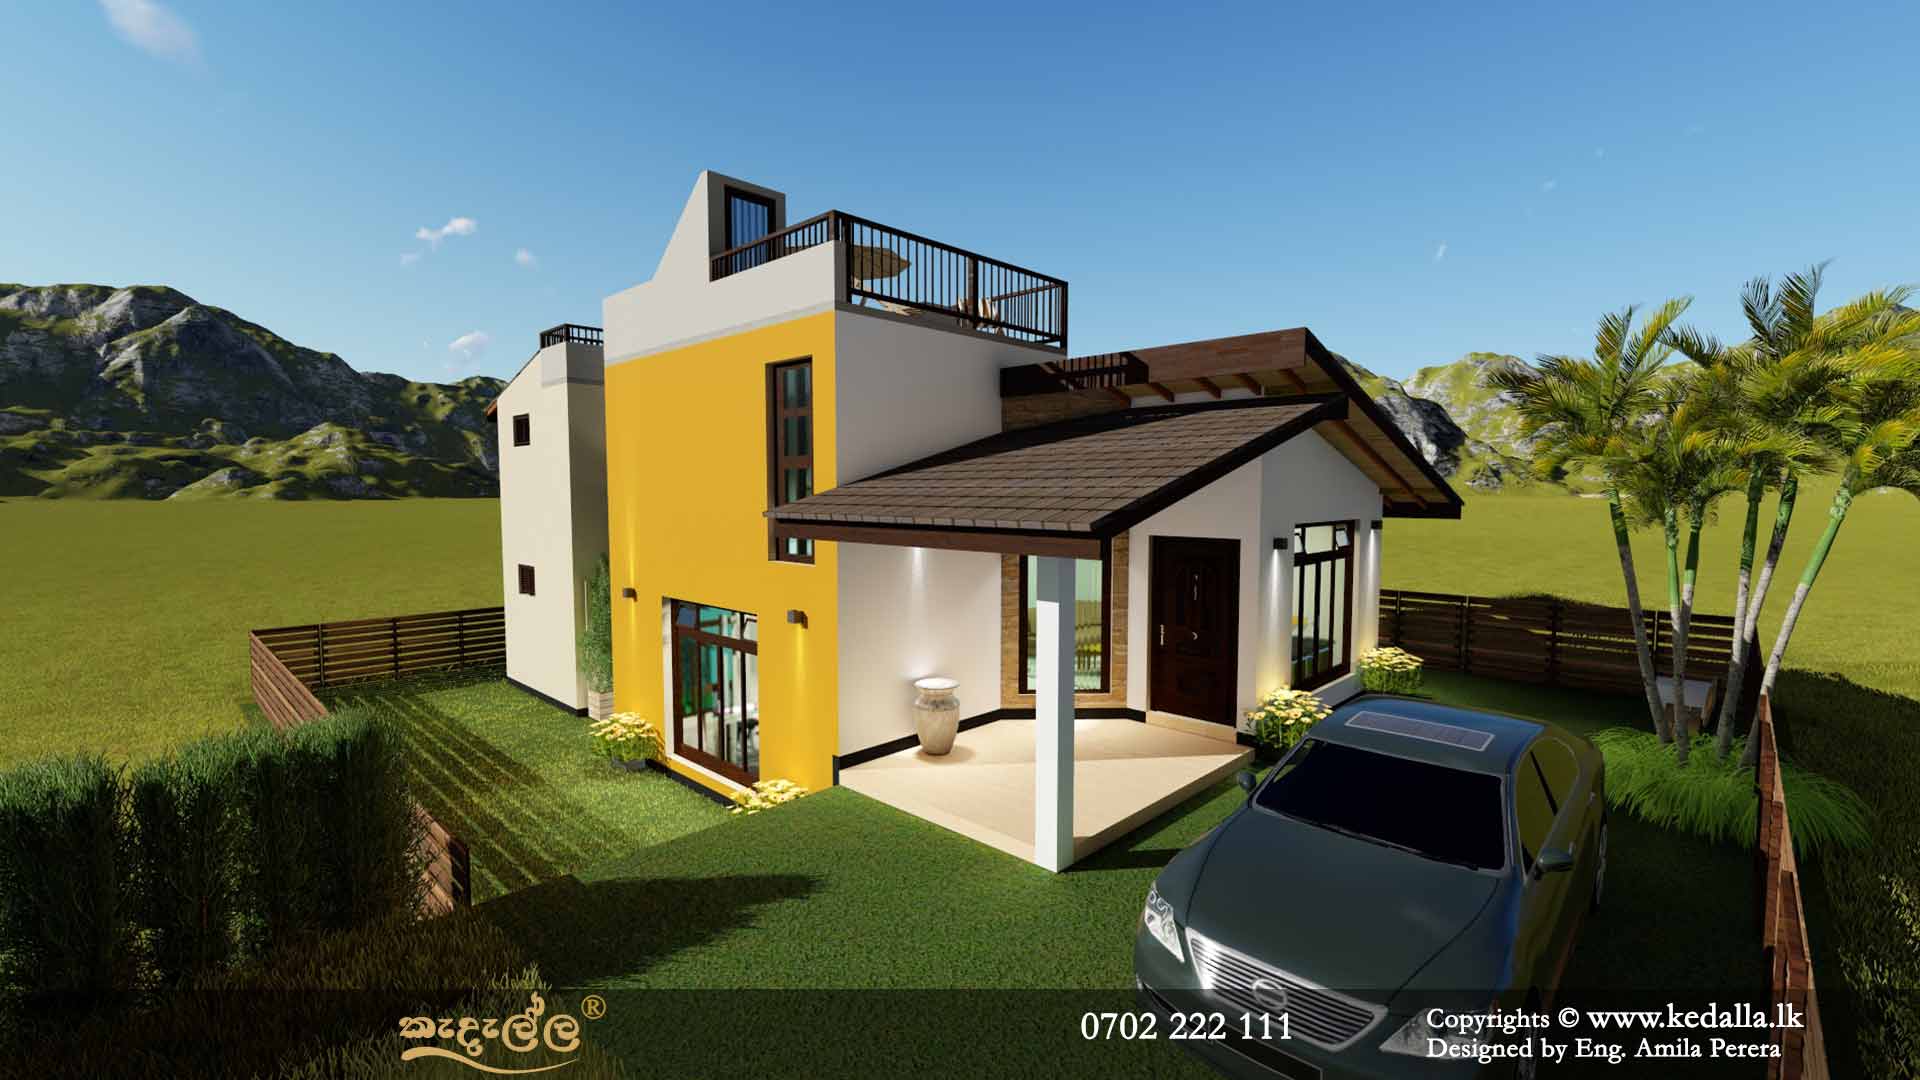 4 Bedroom Box Model House Designs done by Top Architects in Matale Sri Lanka